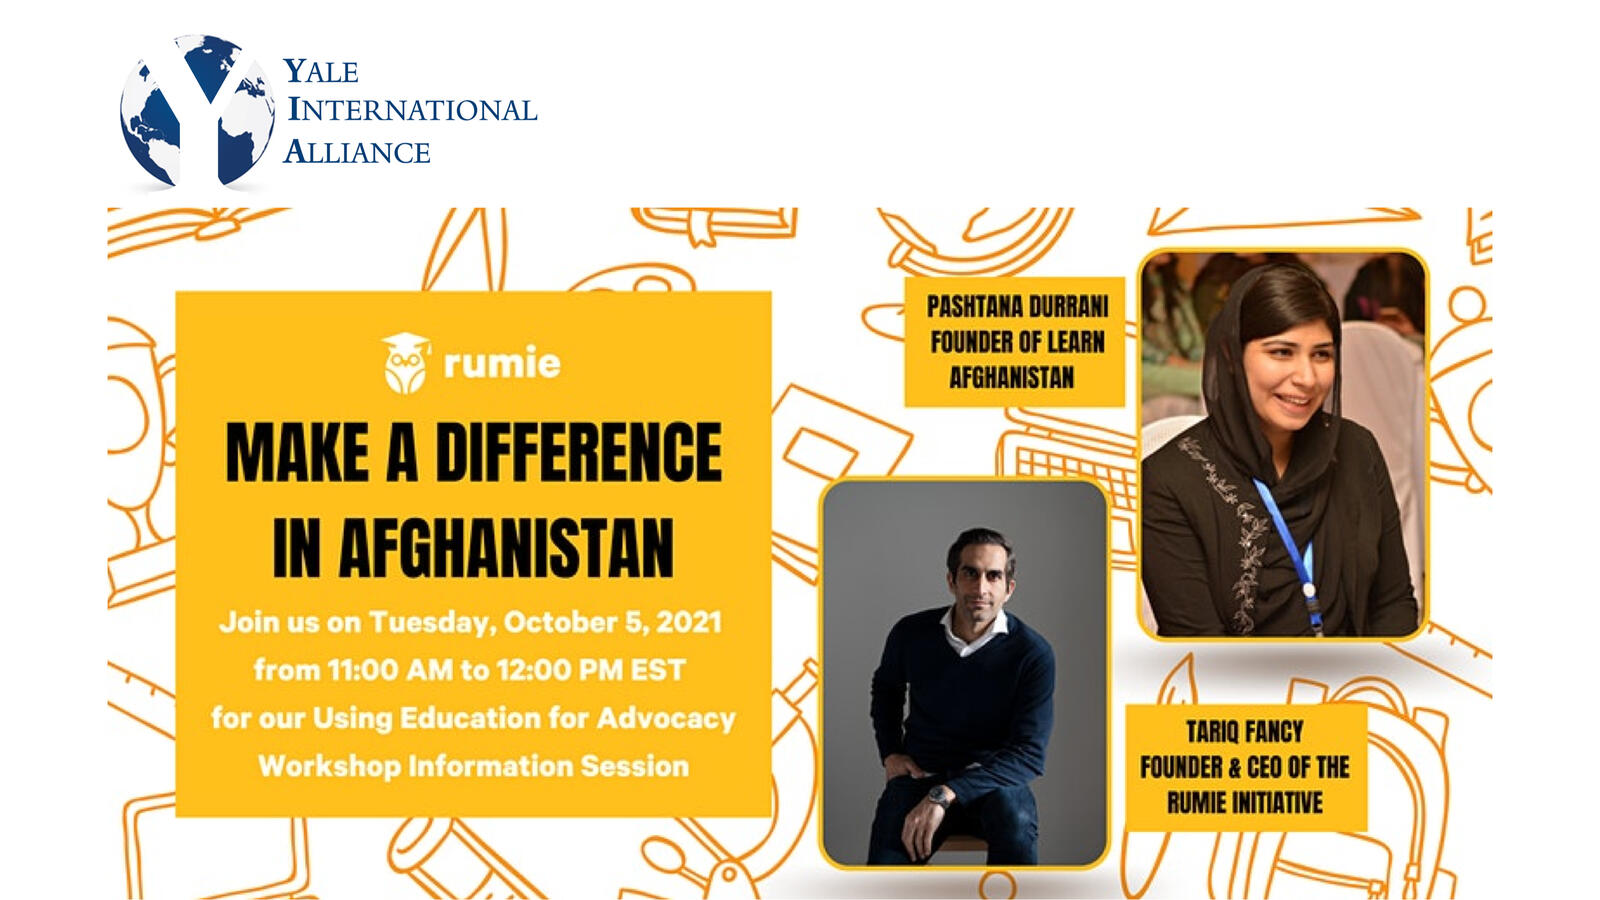 Yale International Alliance presents "Make a difference in Afghanistan: Using Education for Advocacy" co-sponsored by YIA and The Rumie Initiative  